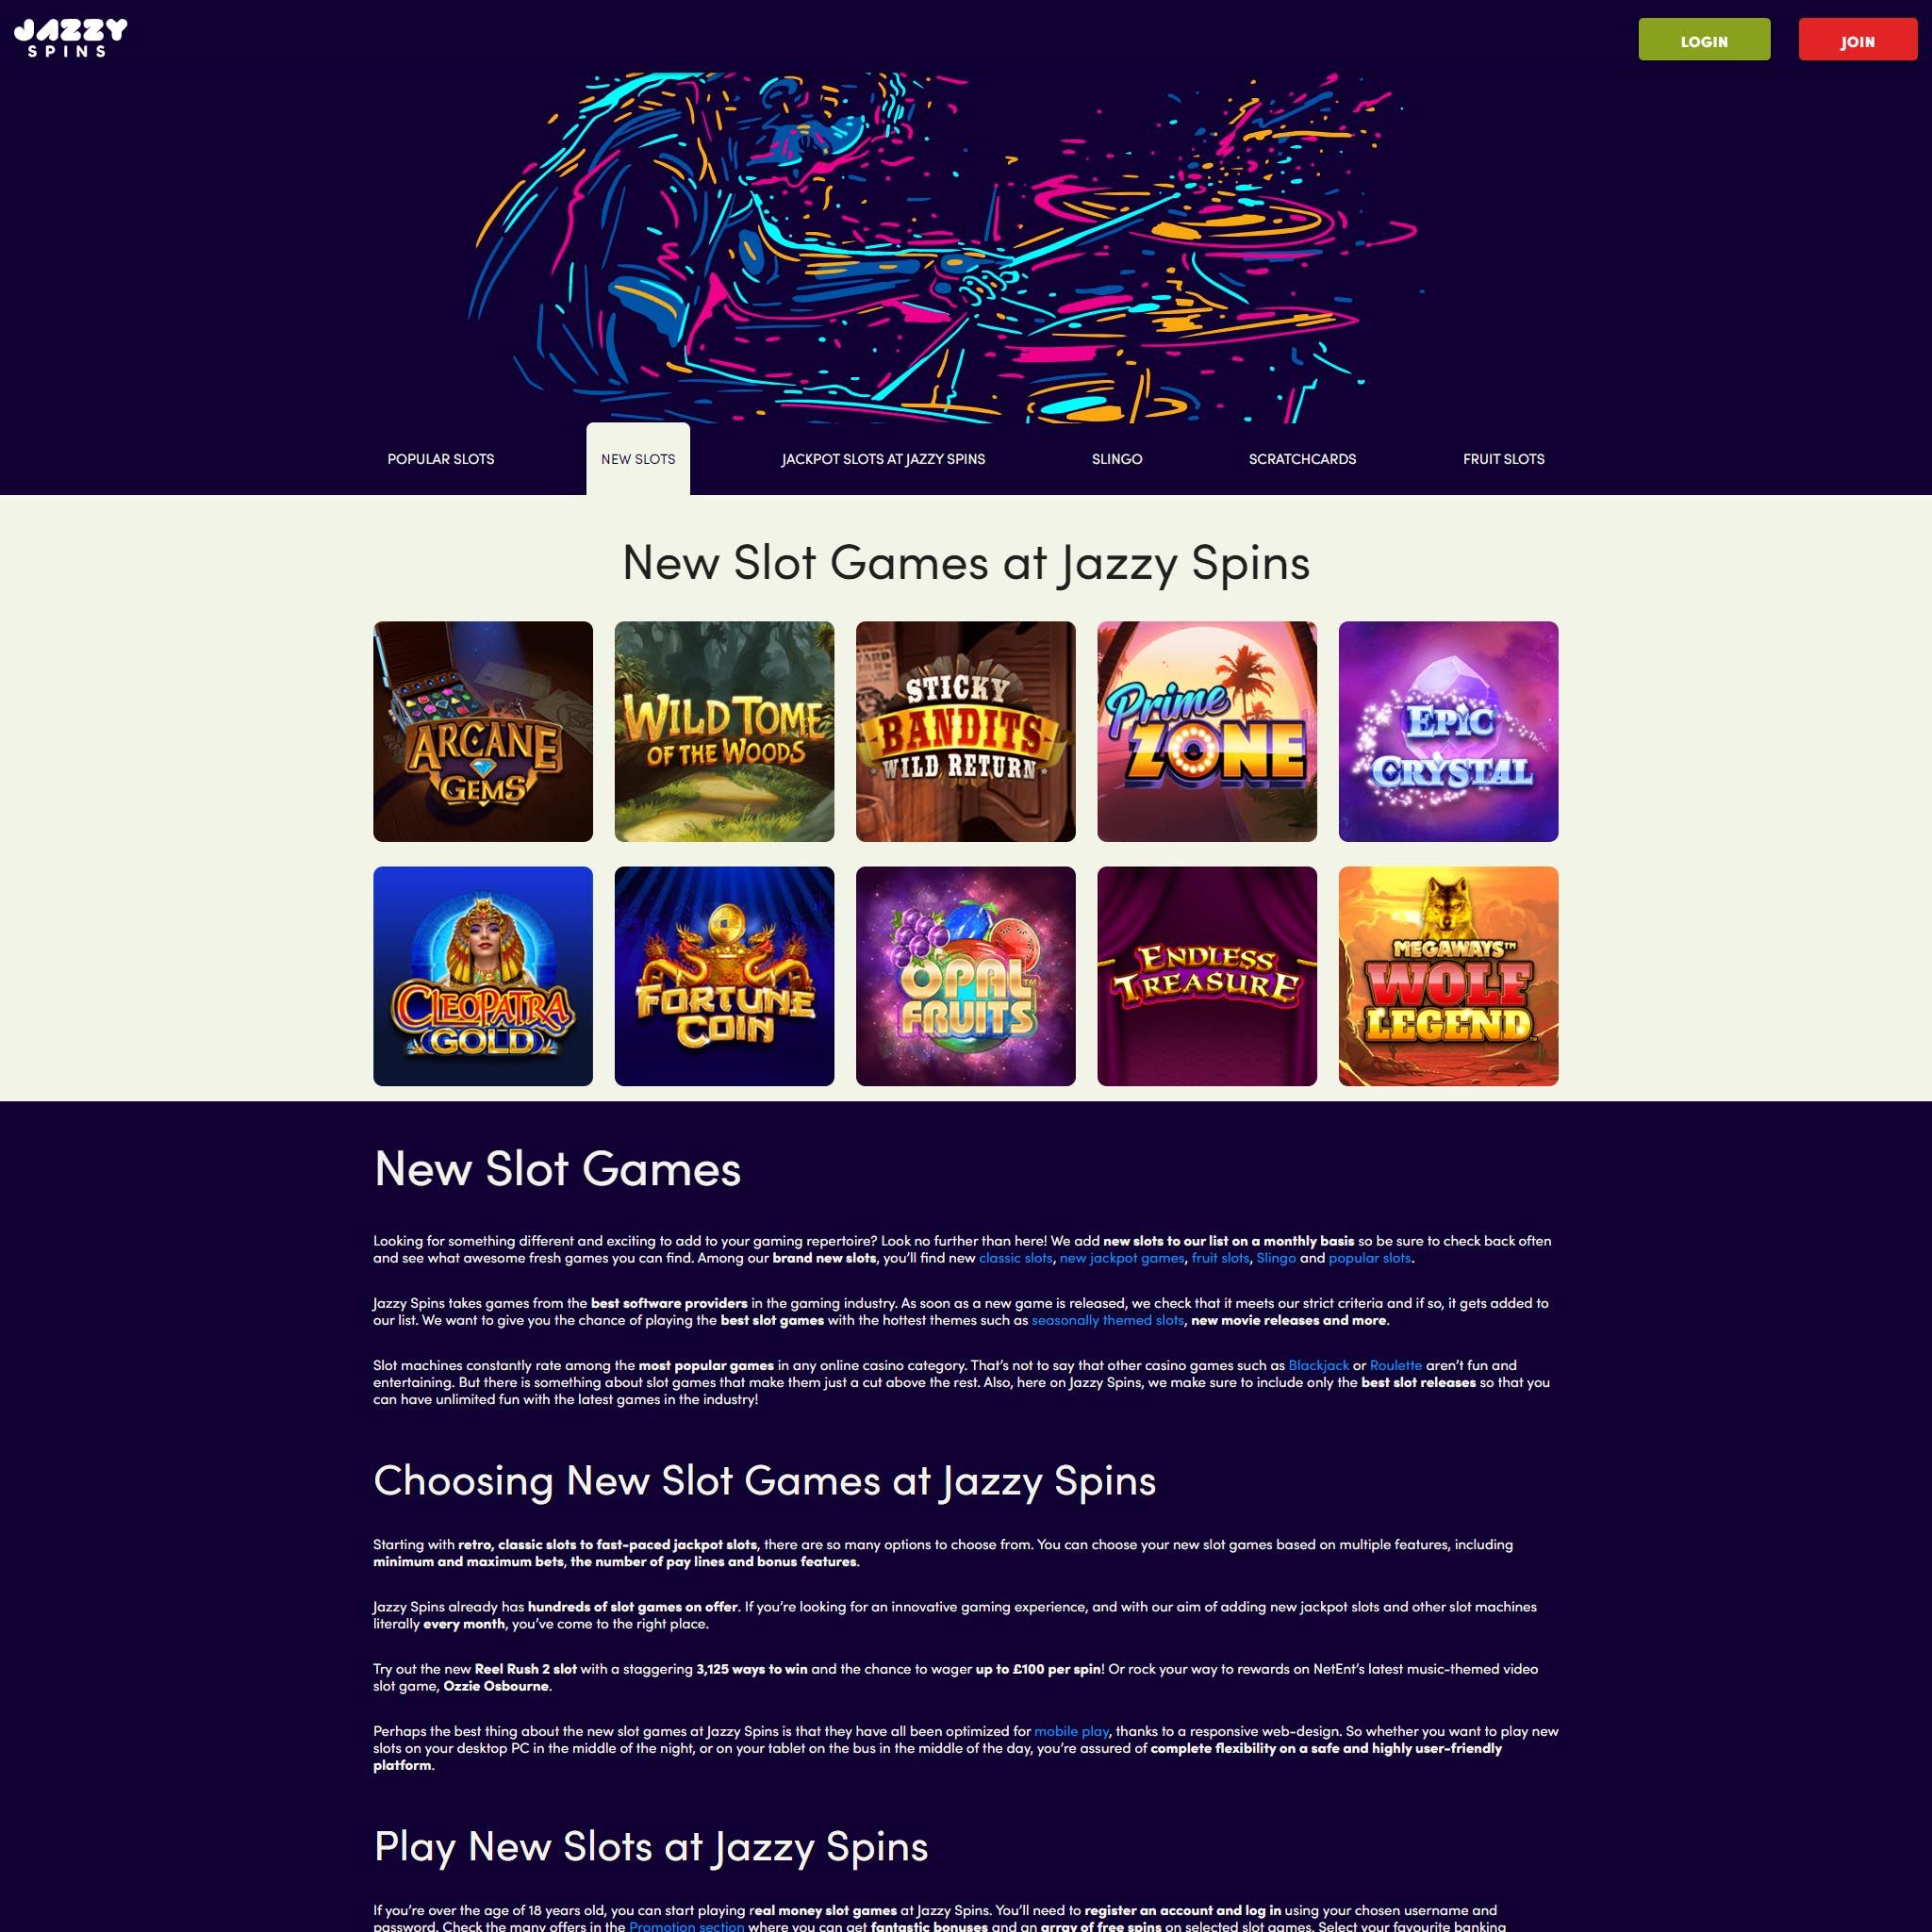 Jazzy Spins full games catalogue